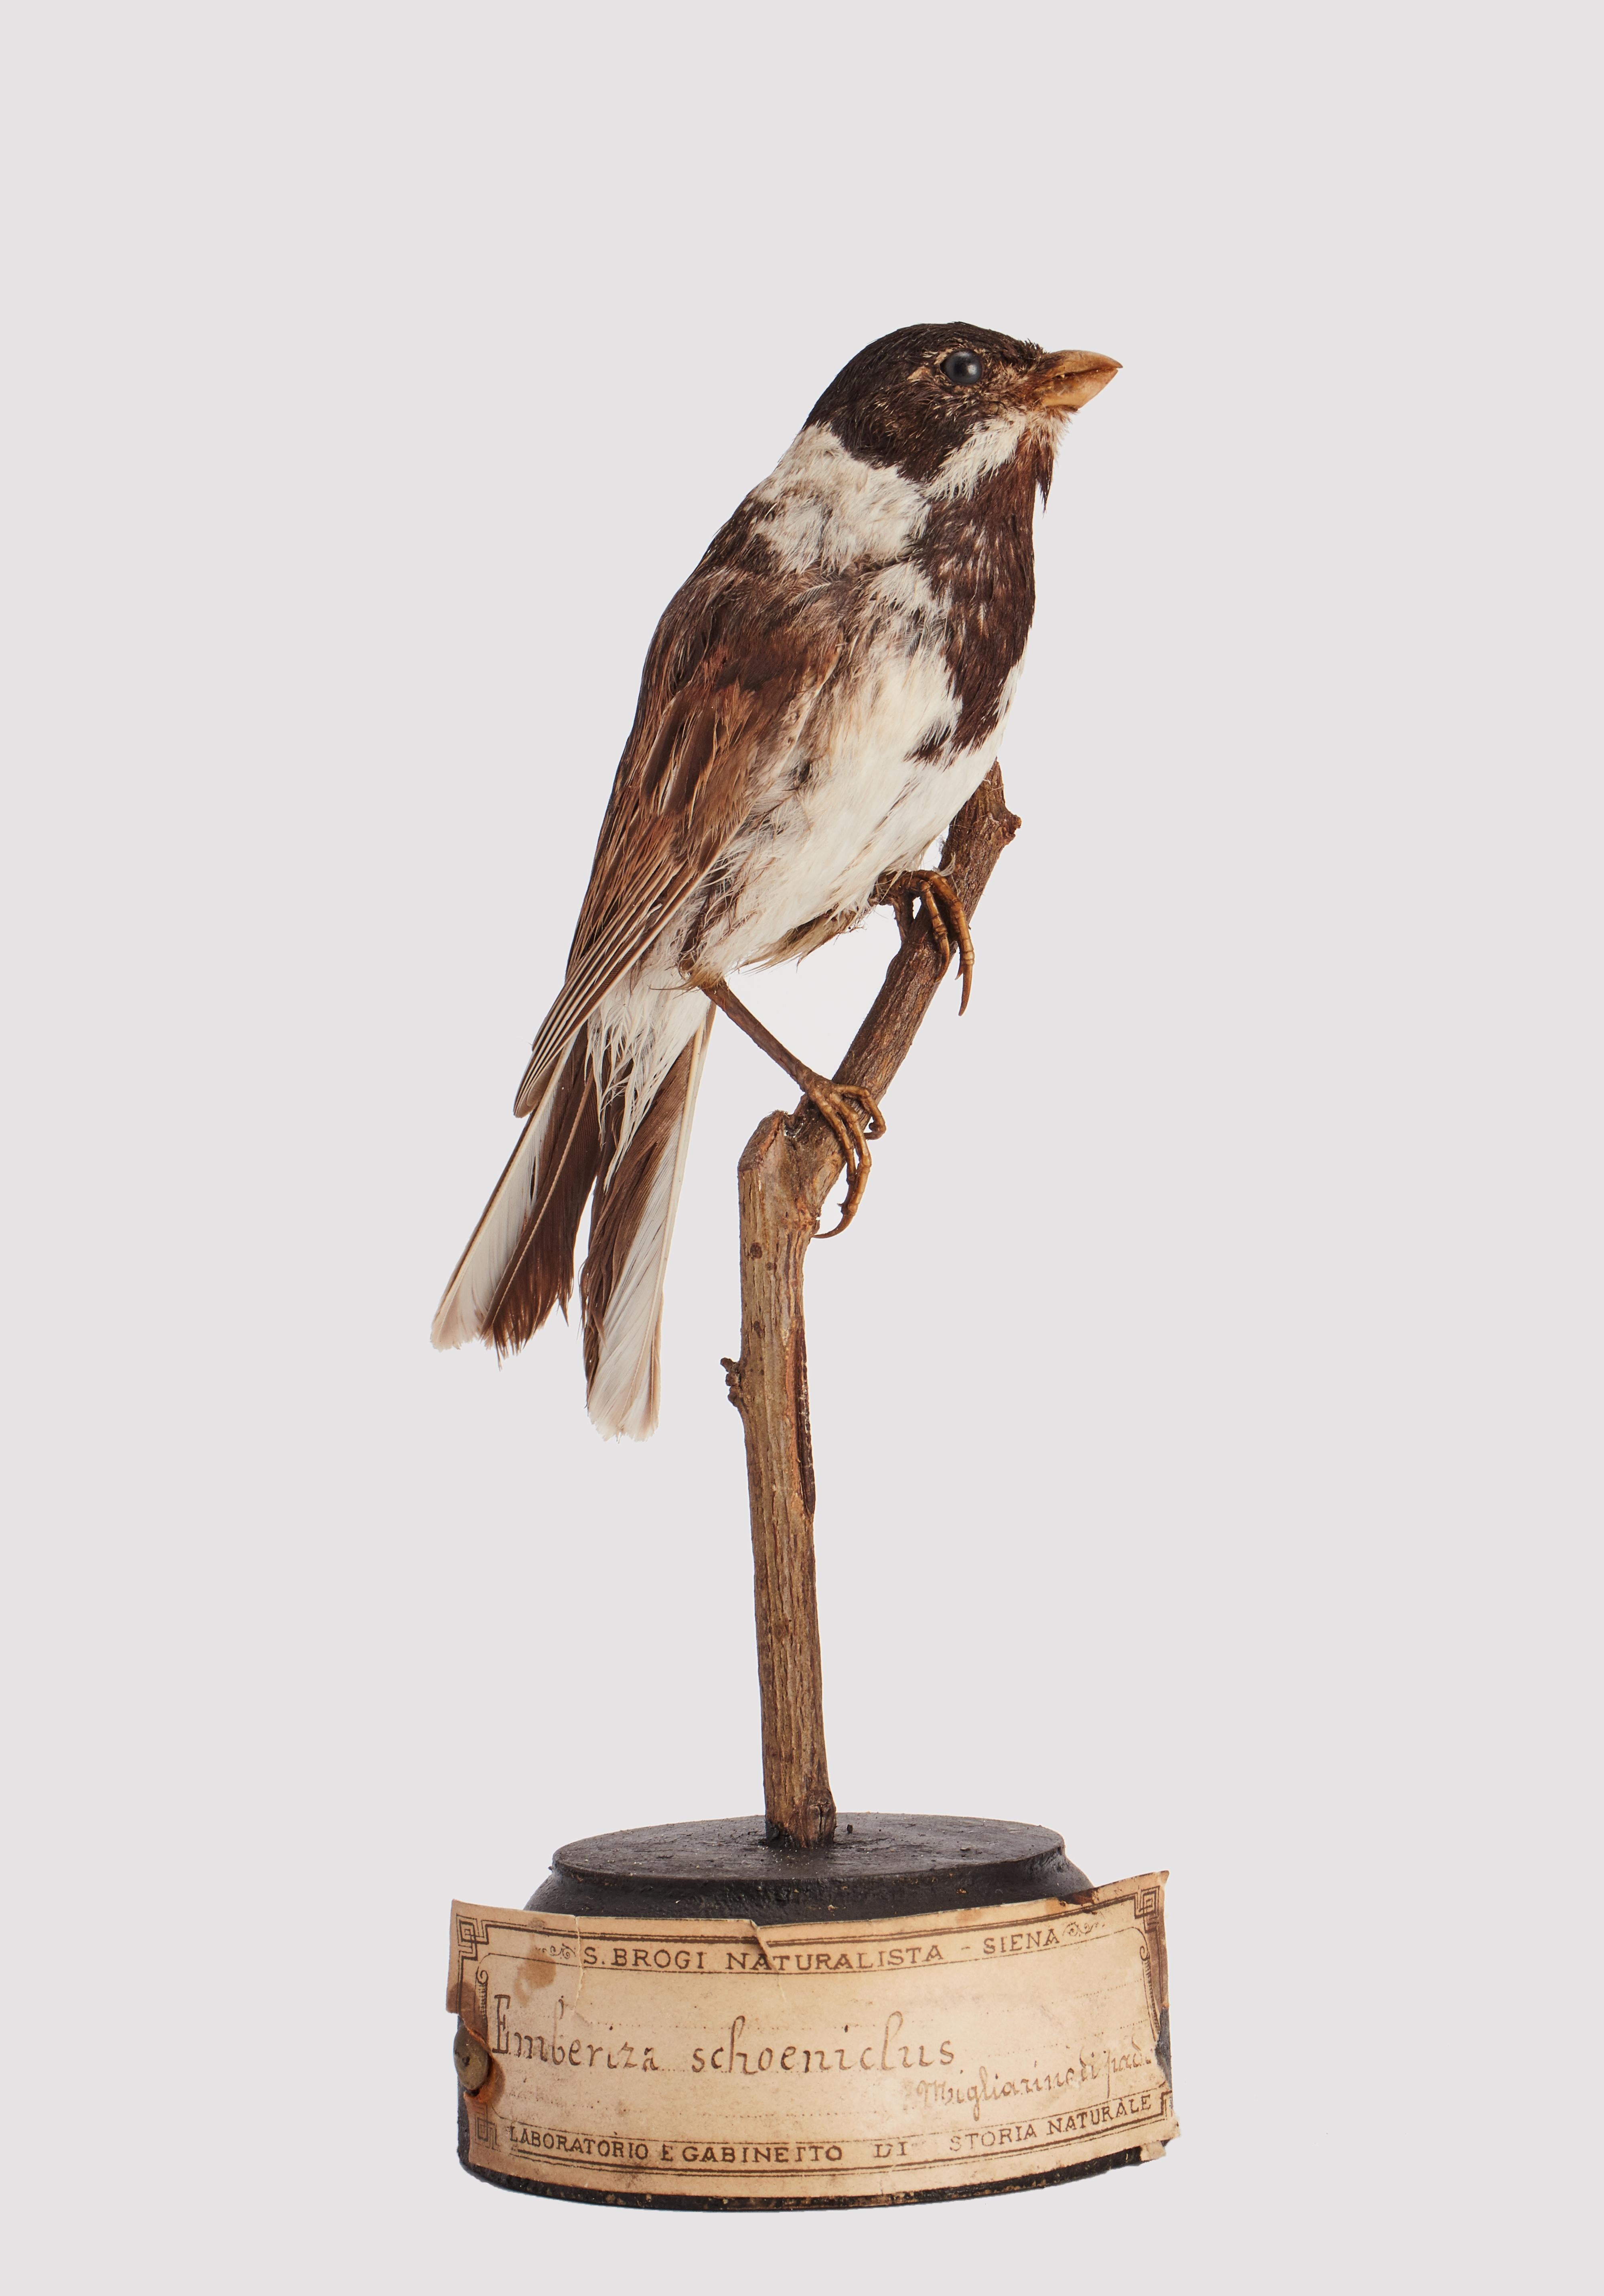 Animal Skin Stuffed Marsh Bird for Natural History Cabinet, Italy 1880 For Sale